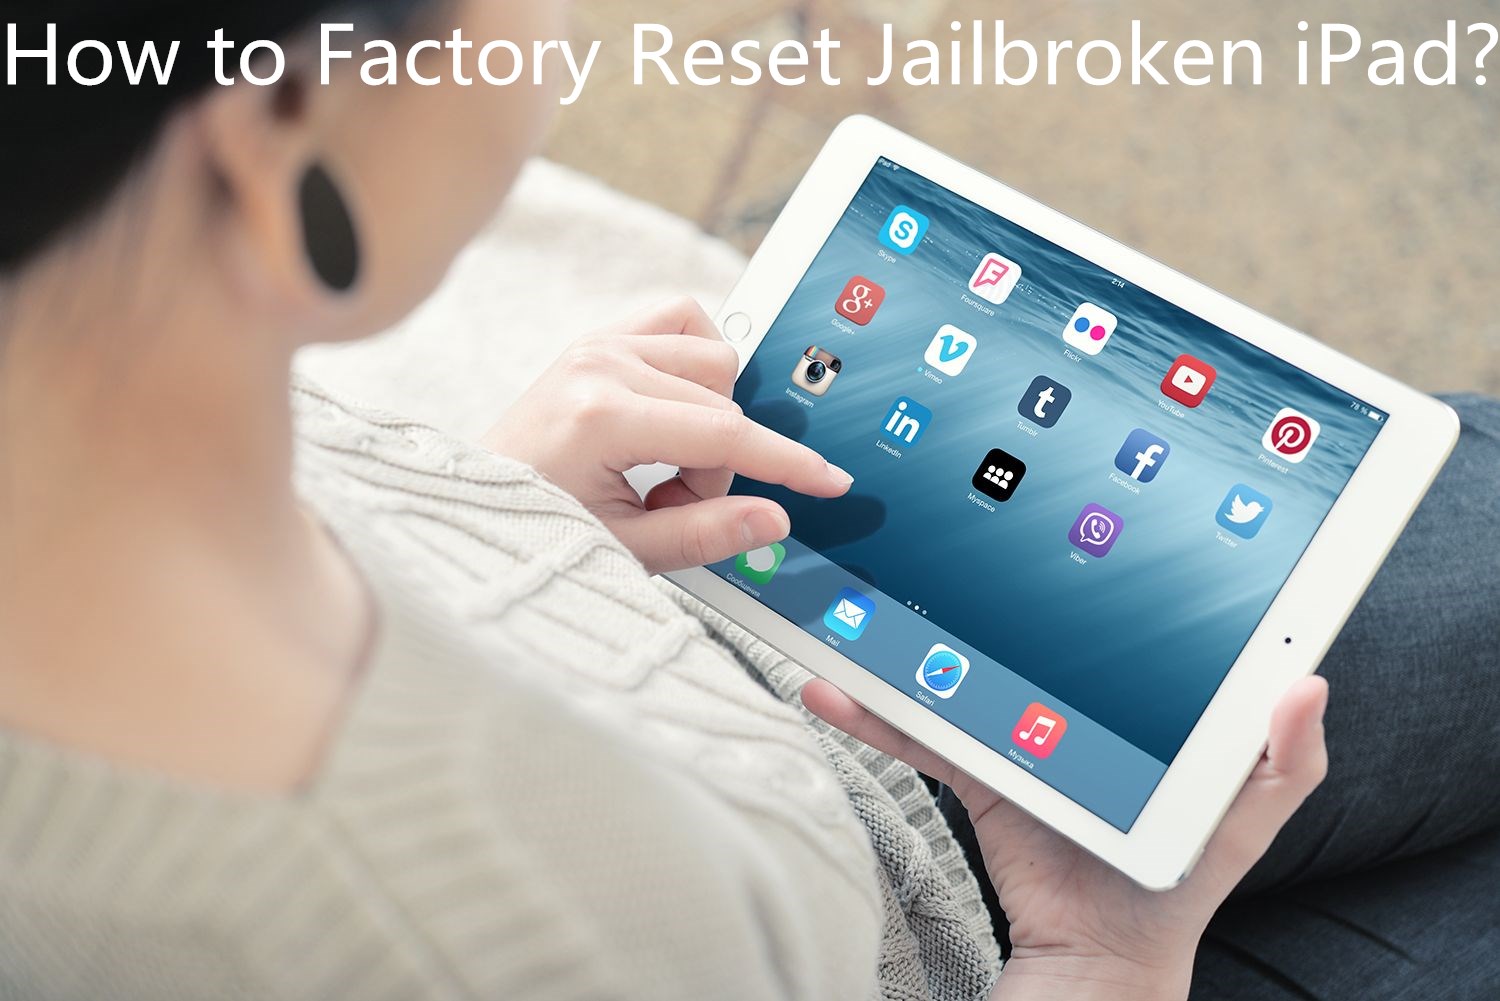 How to Restore Jailbroken iPad To Factory Settings?